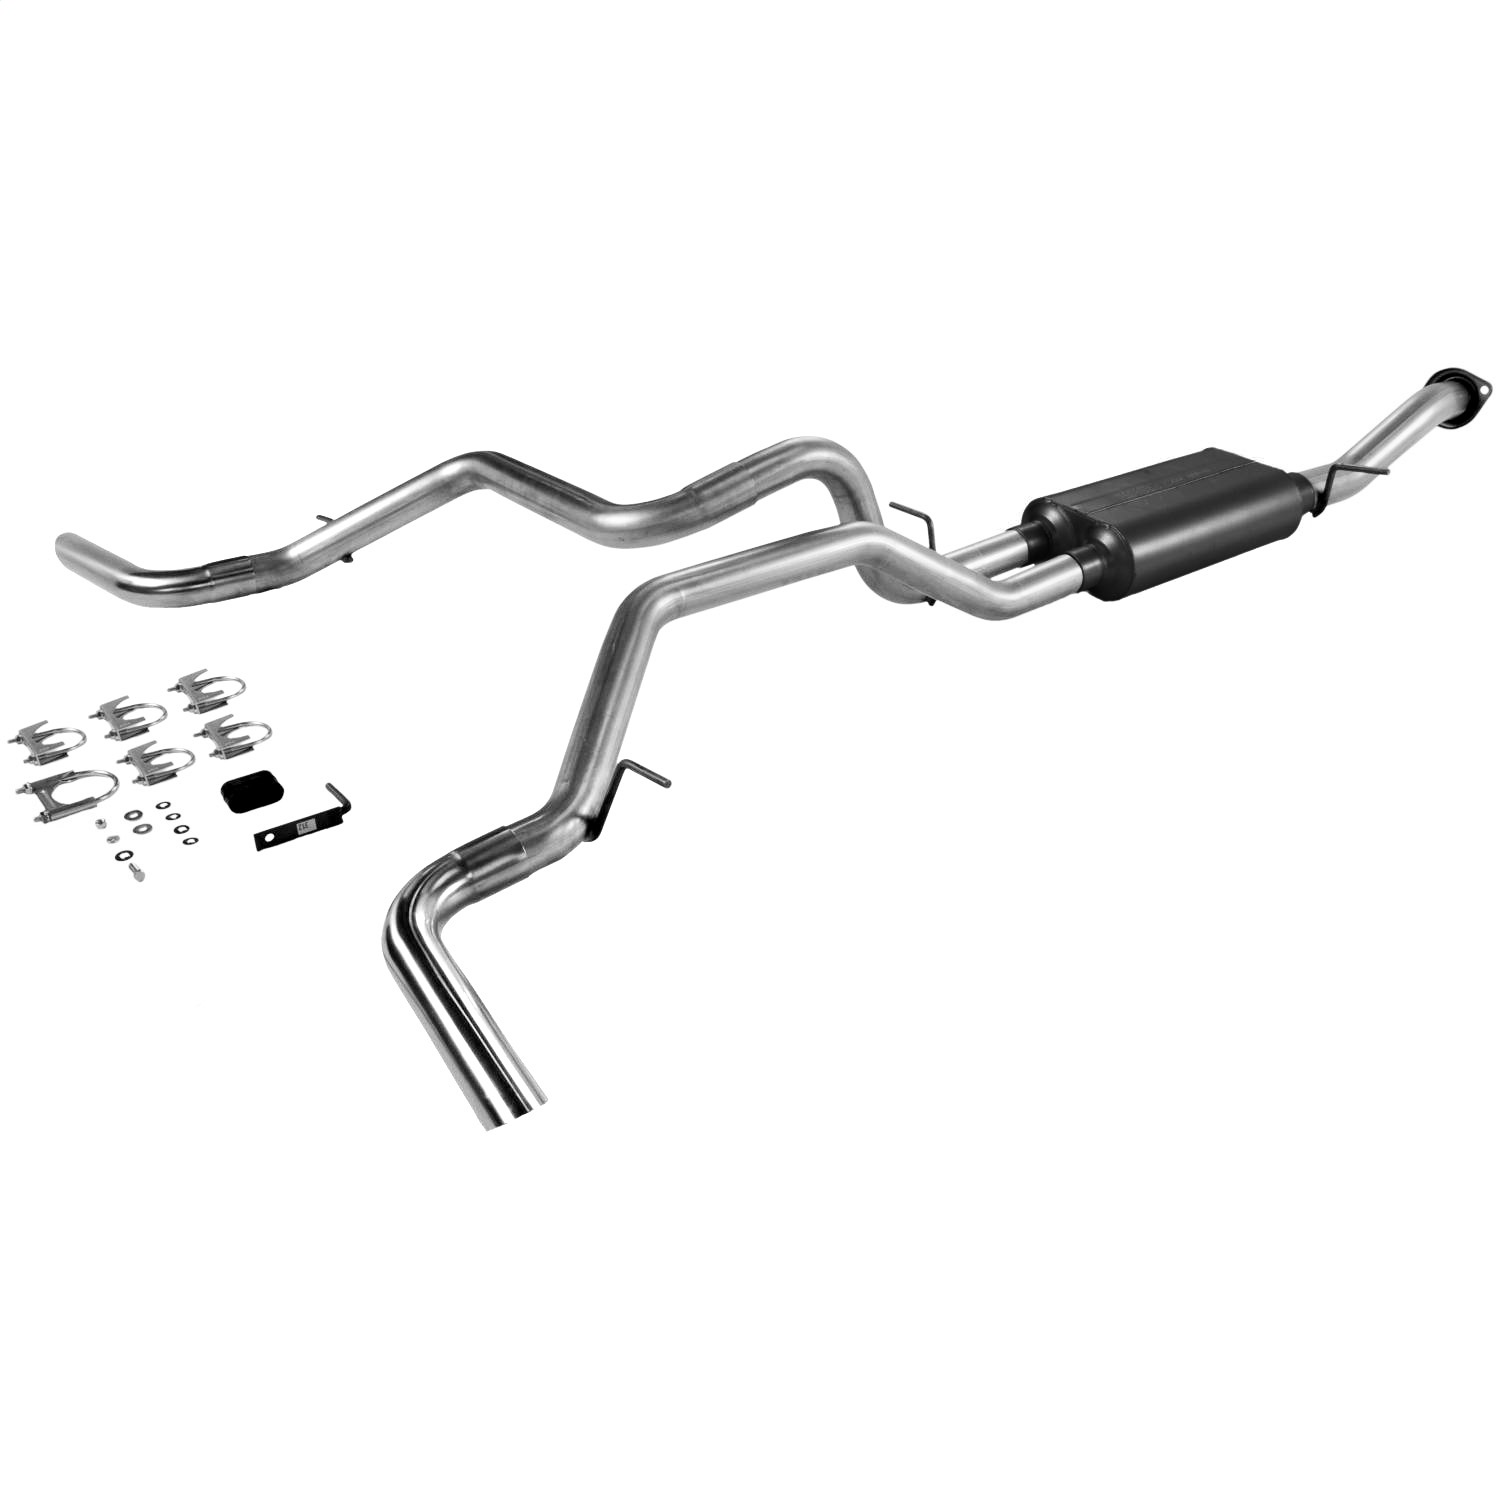 Flowmaster Flowmaster 17368 American Thunder Cat Back Exhaust System Fits 00-03 Tahoe Yukon